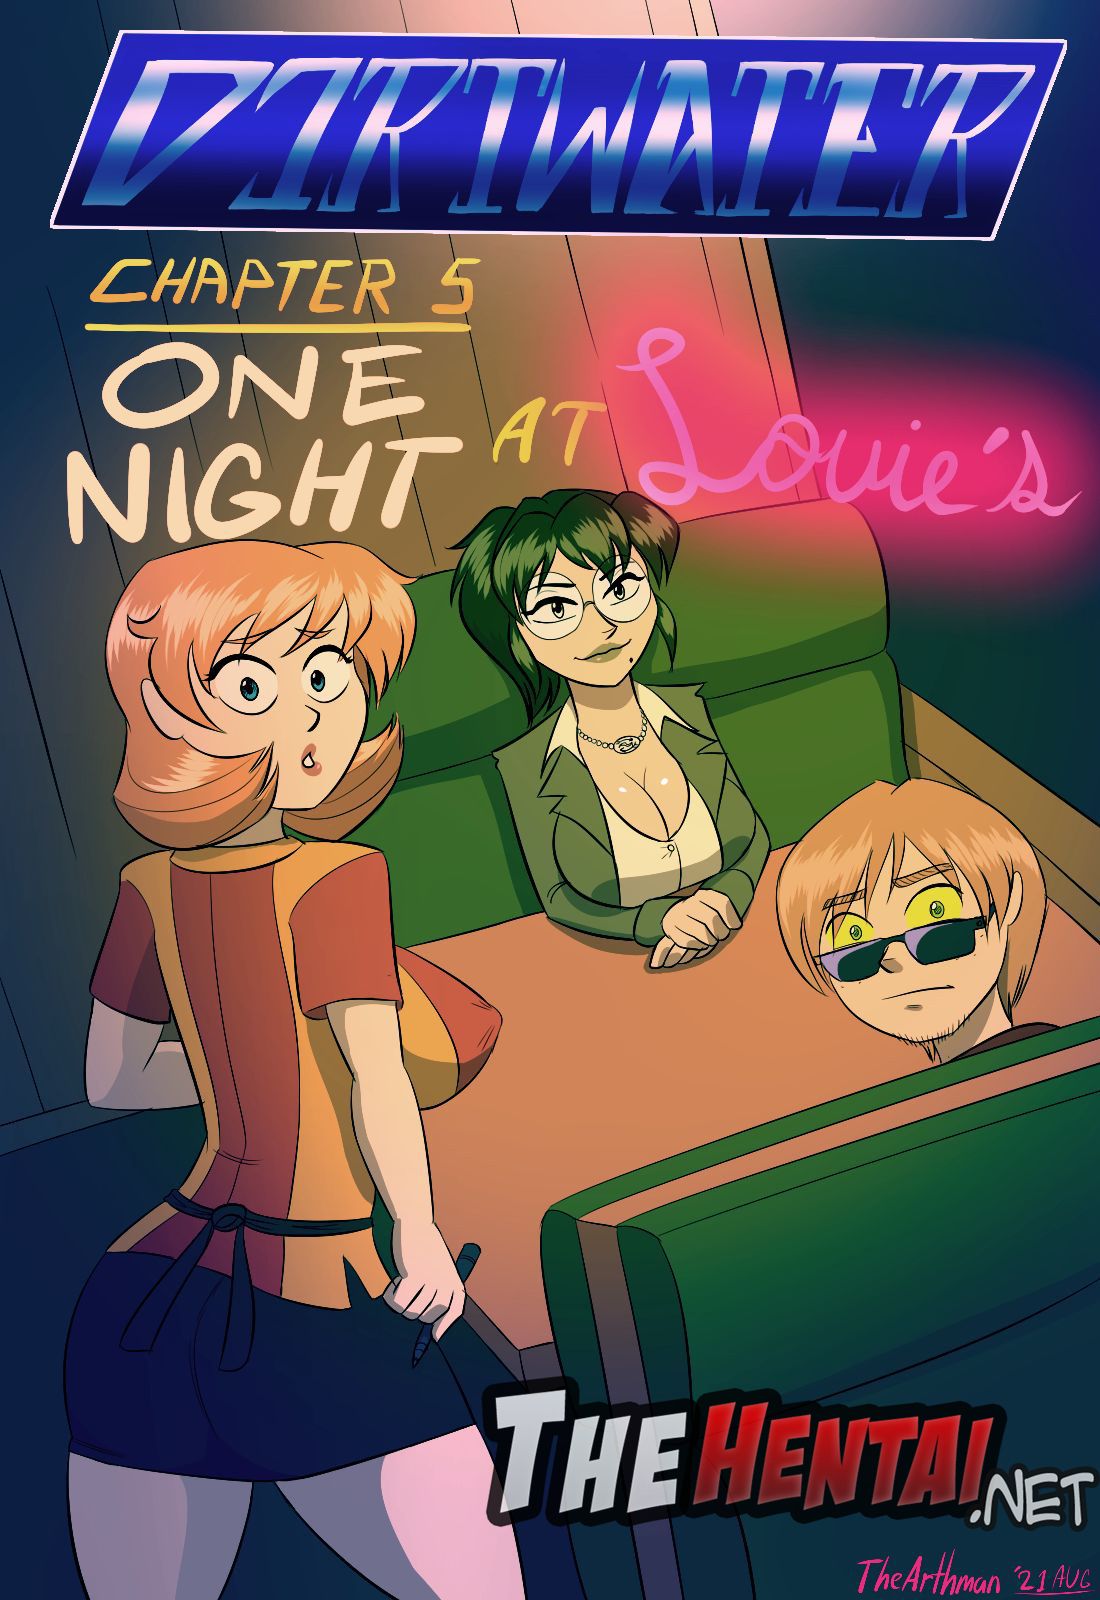 Dirtwater - Part 5 - One Night at Louie’s Hentai pt-br 01